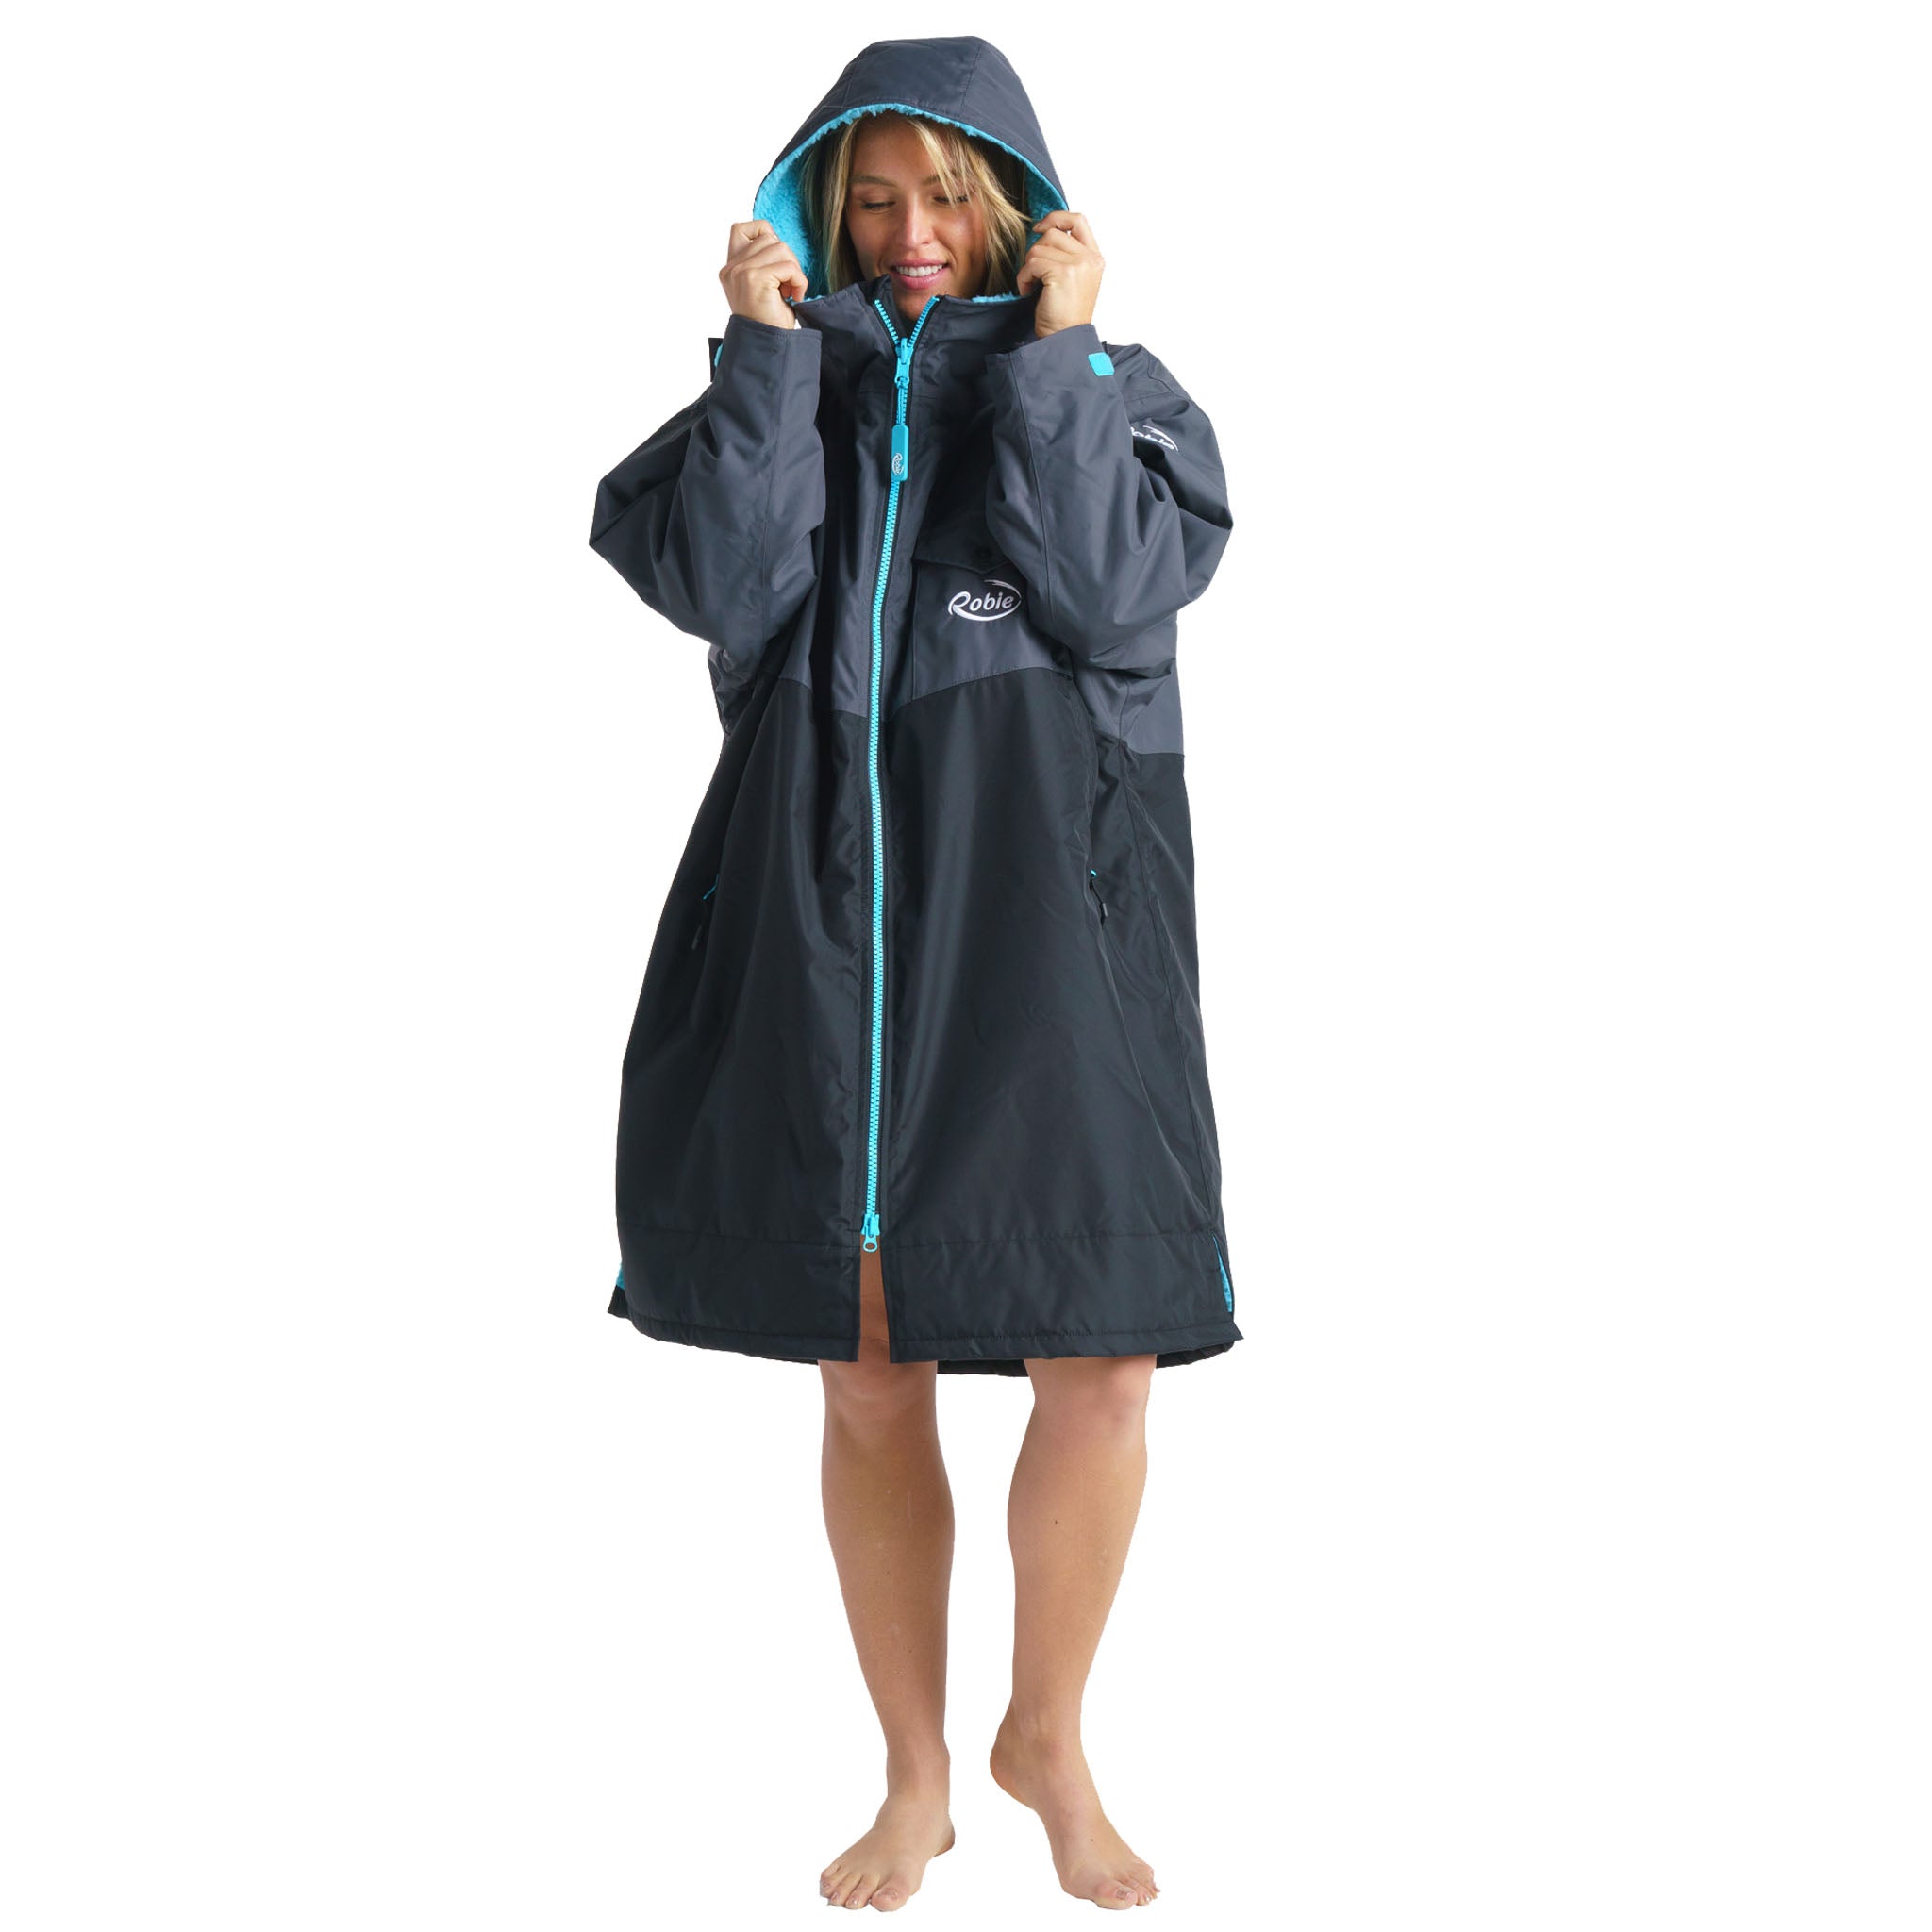 Robie Dry-Series Eco Long Sleeve Hooded Changing Robe Unisex Black/Charcoal - Front